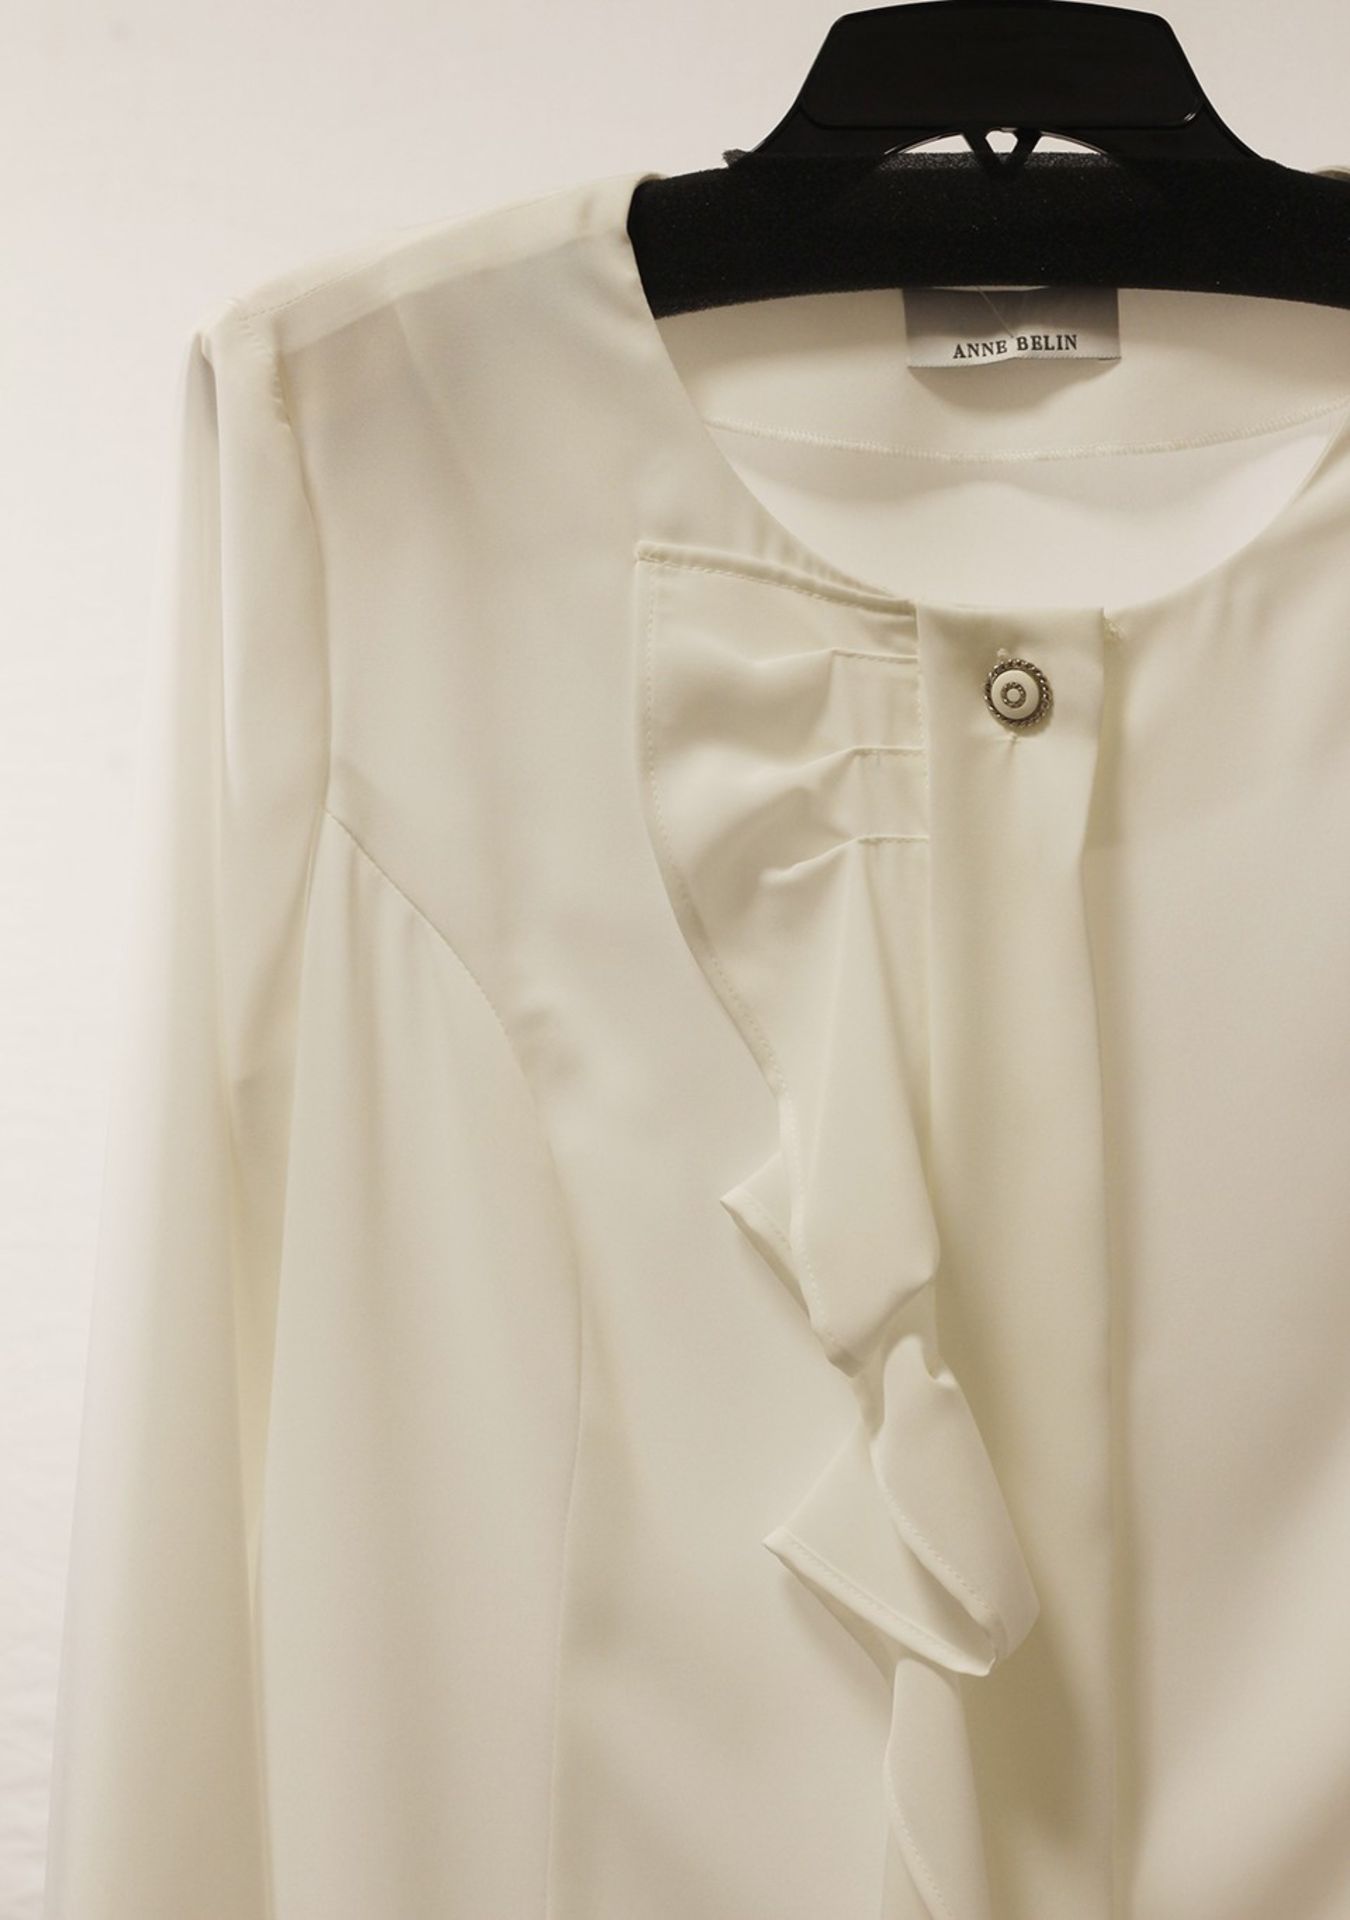 1 x Anne Belin White Shirt - Size: 18 - Material: 100% Polyester - From a High End Clothing Boutique - Image 6 of 9